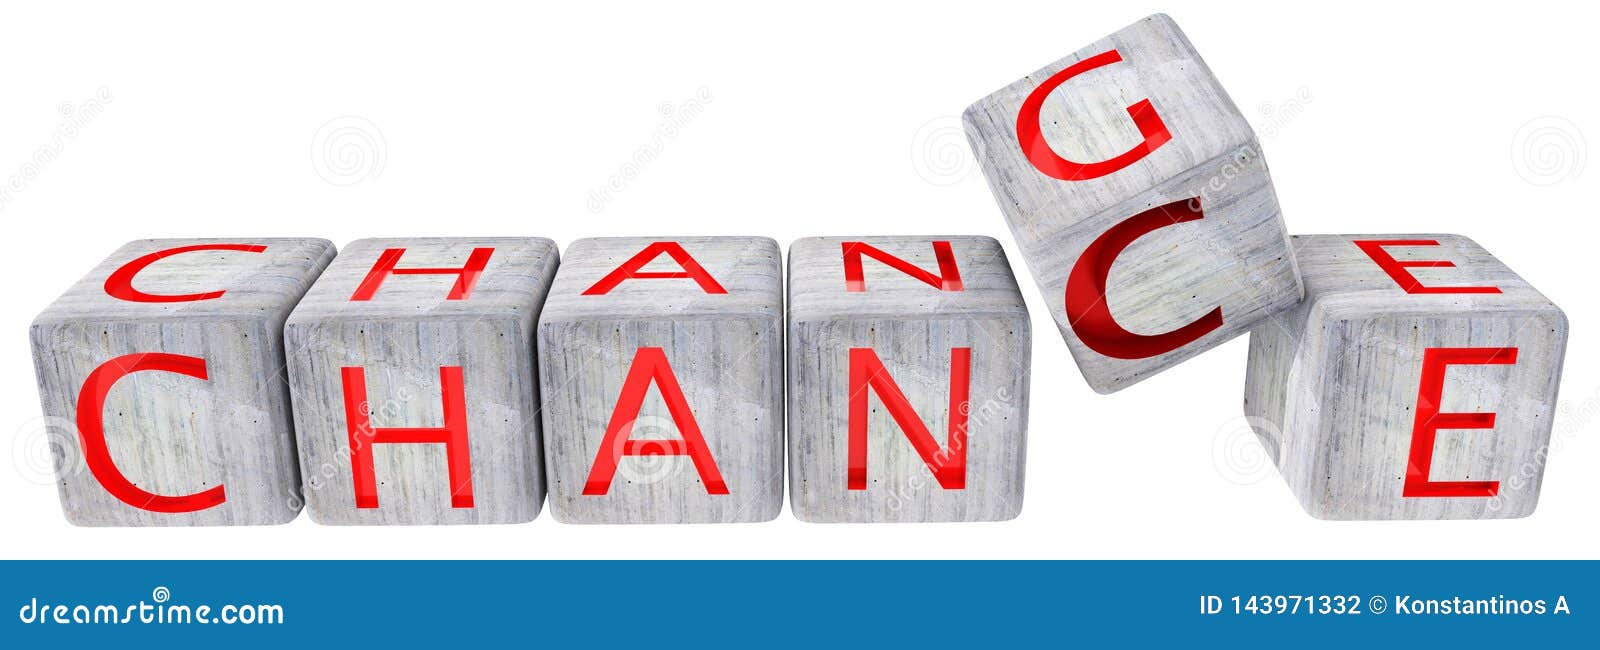 Change chance cement dice red text - 3d rendering. Change chance cement dice red text isolated in white background - 3d rendering